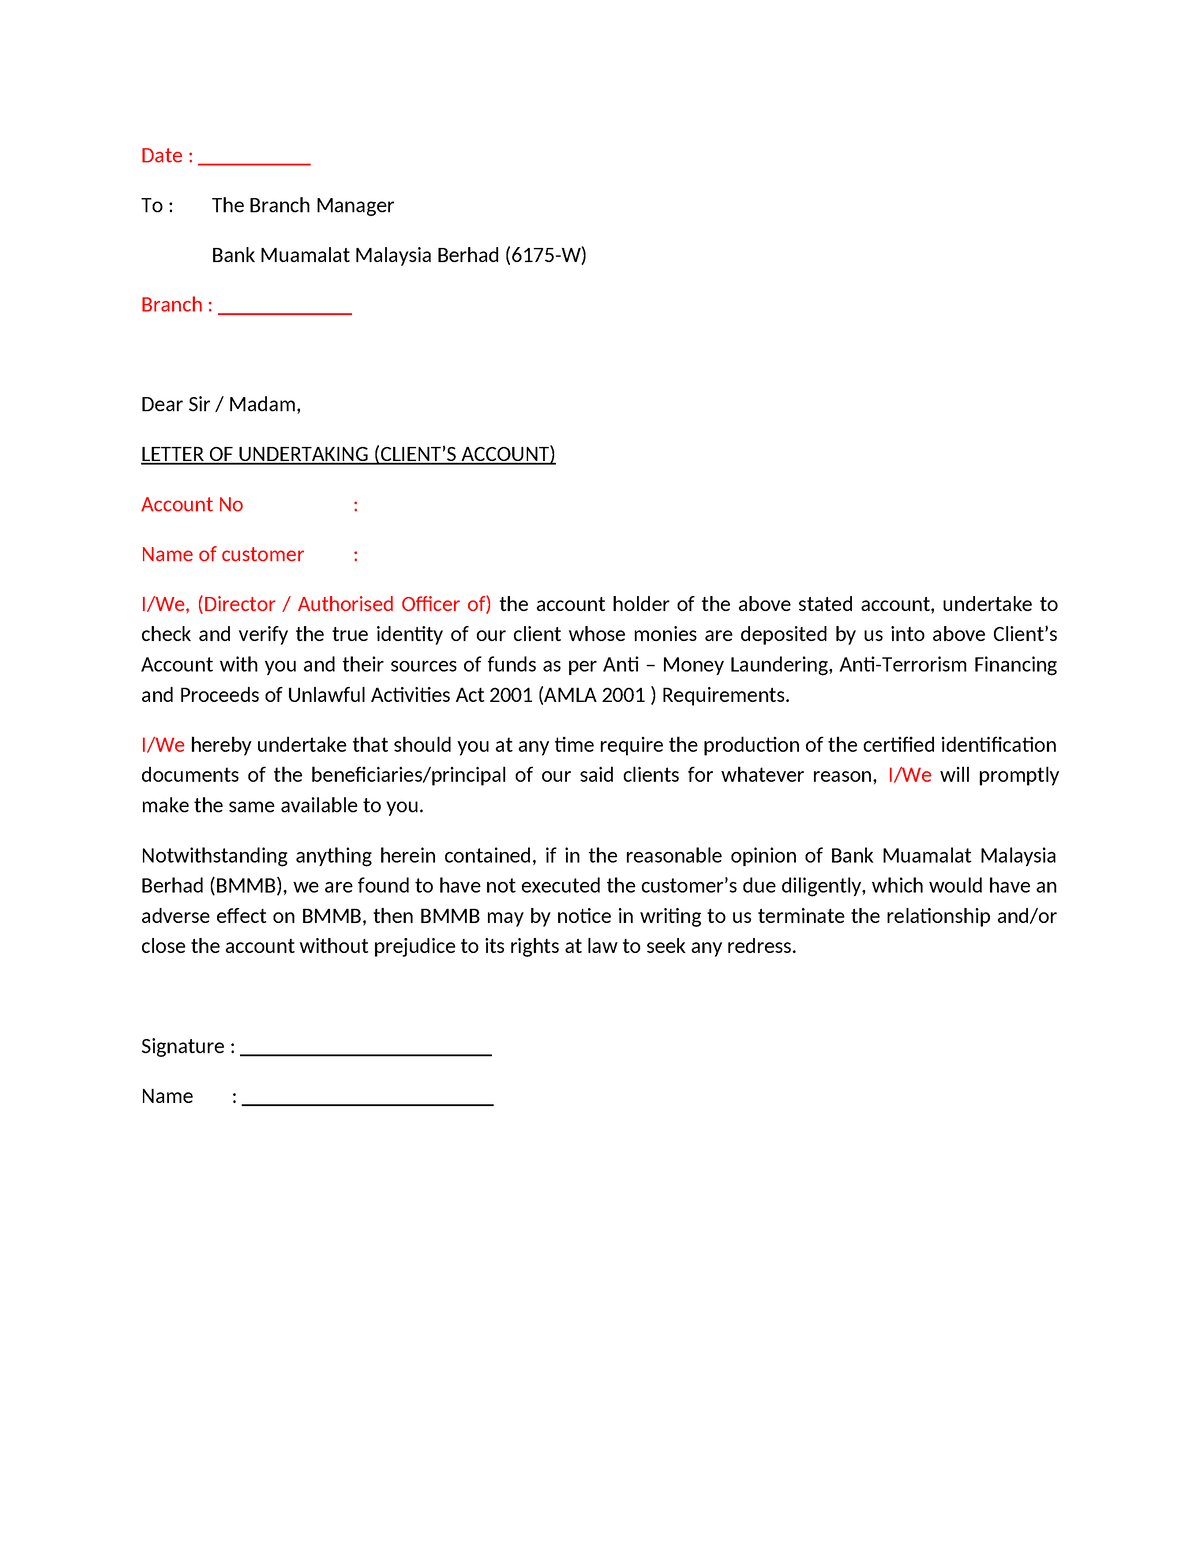 Letter of undertaking - client acc - Date : To : The Branch Manager ...